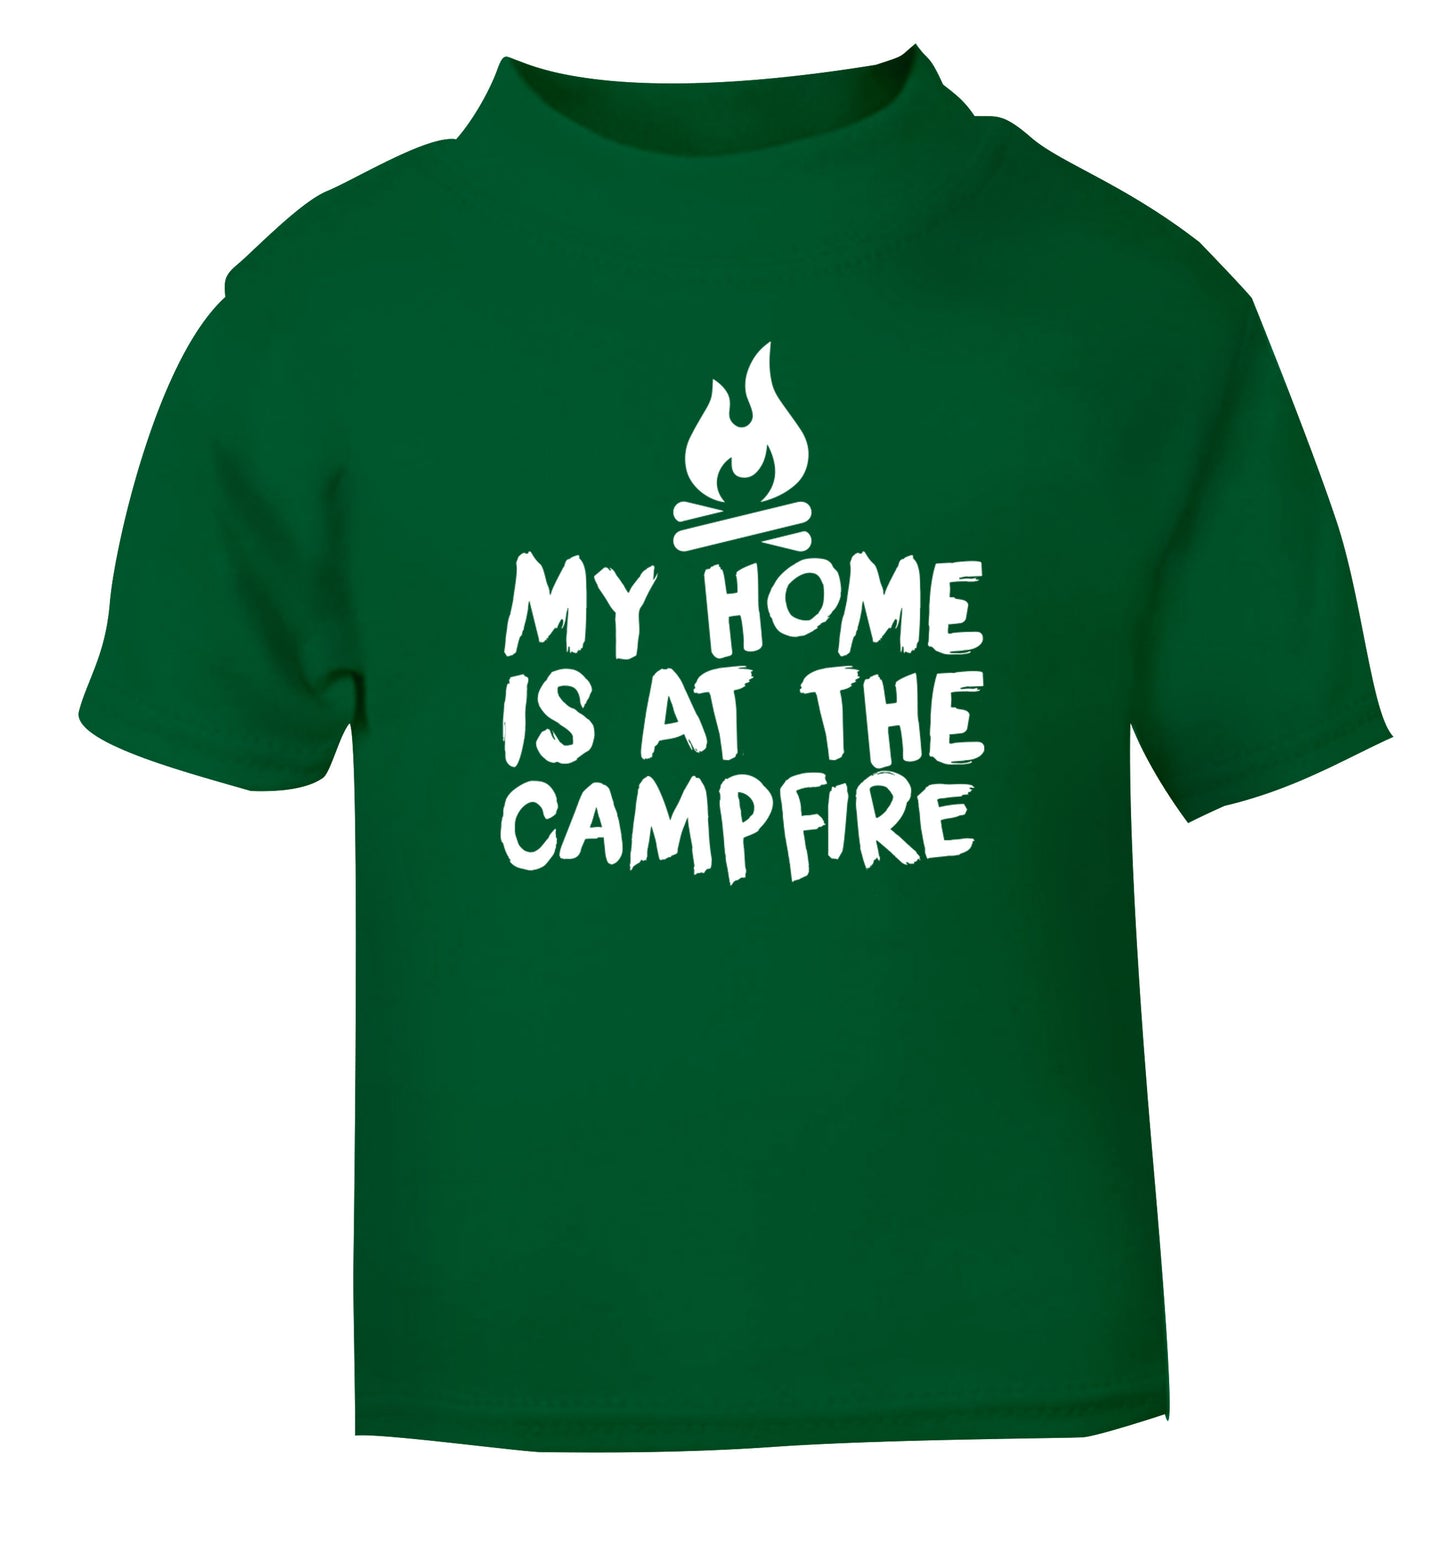 My home is at the campfire green Baby Toddler Tshirt 2 Years